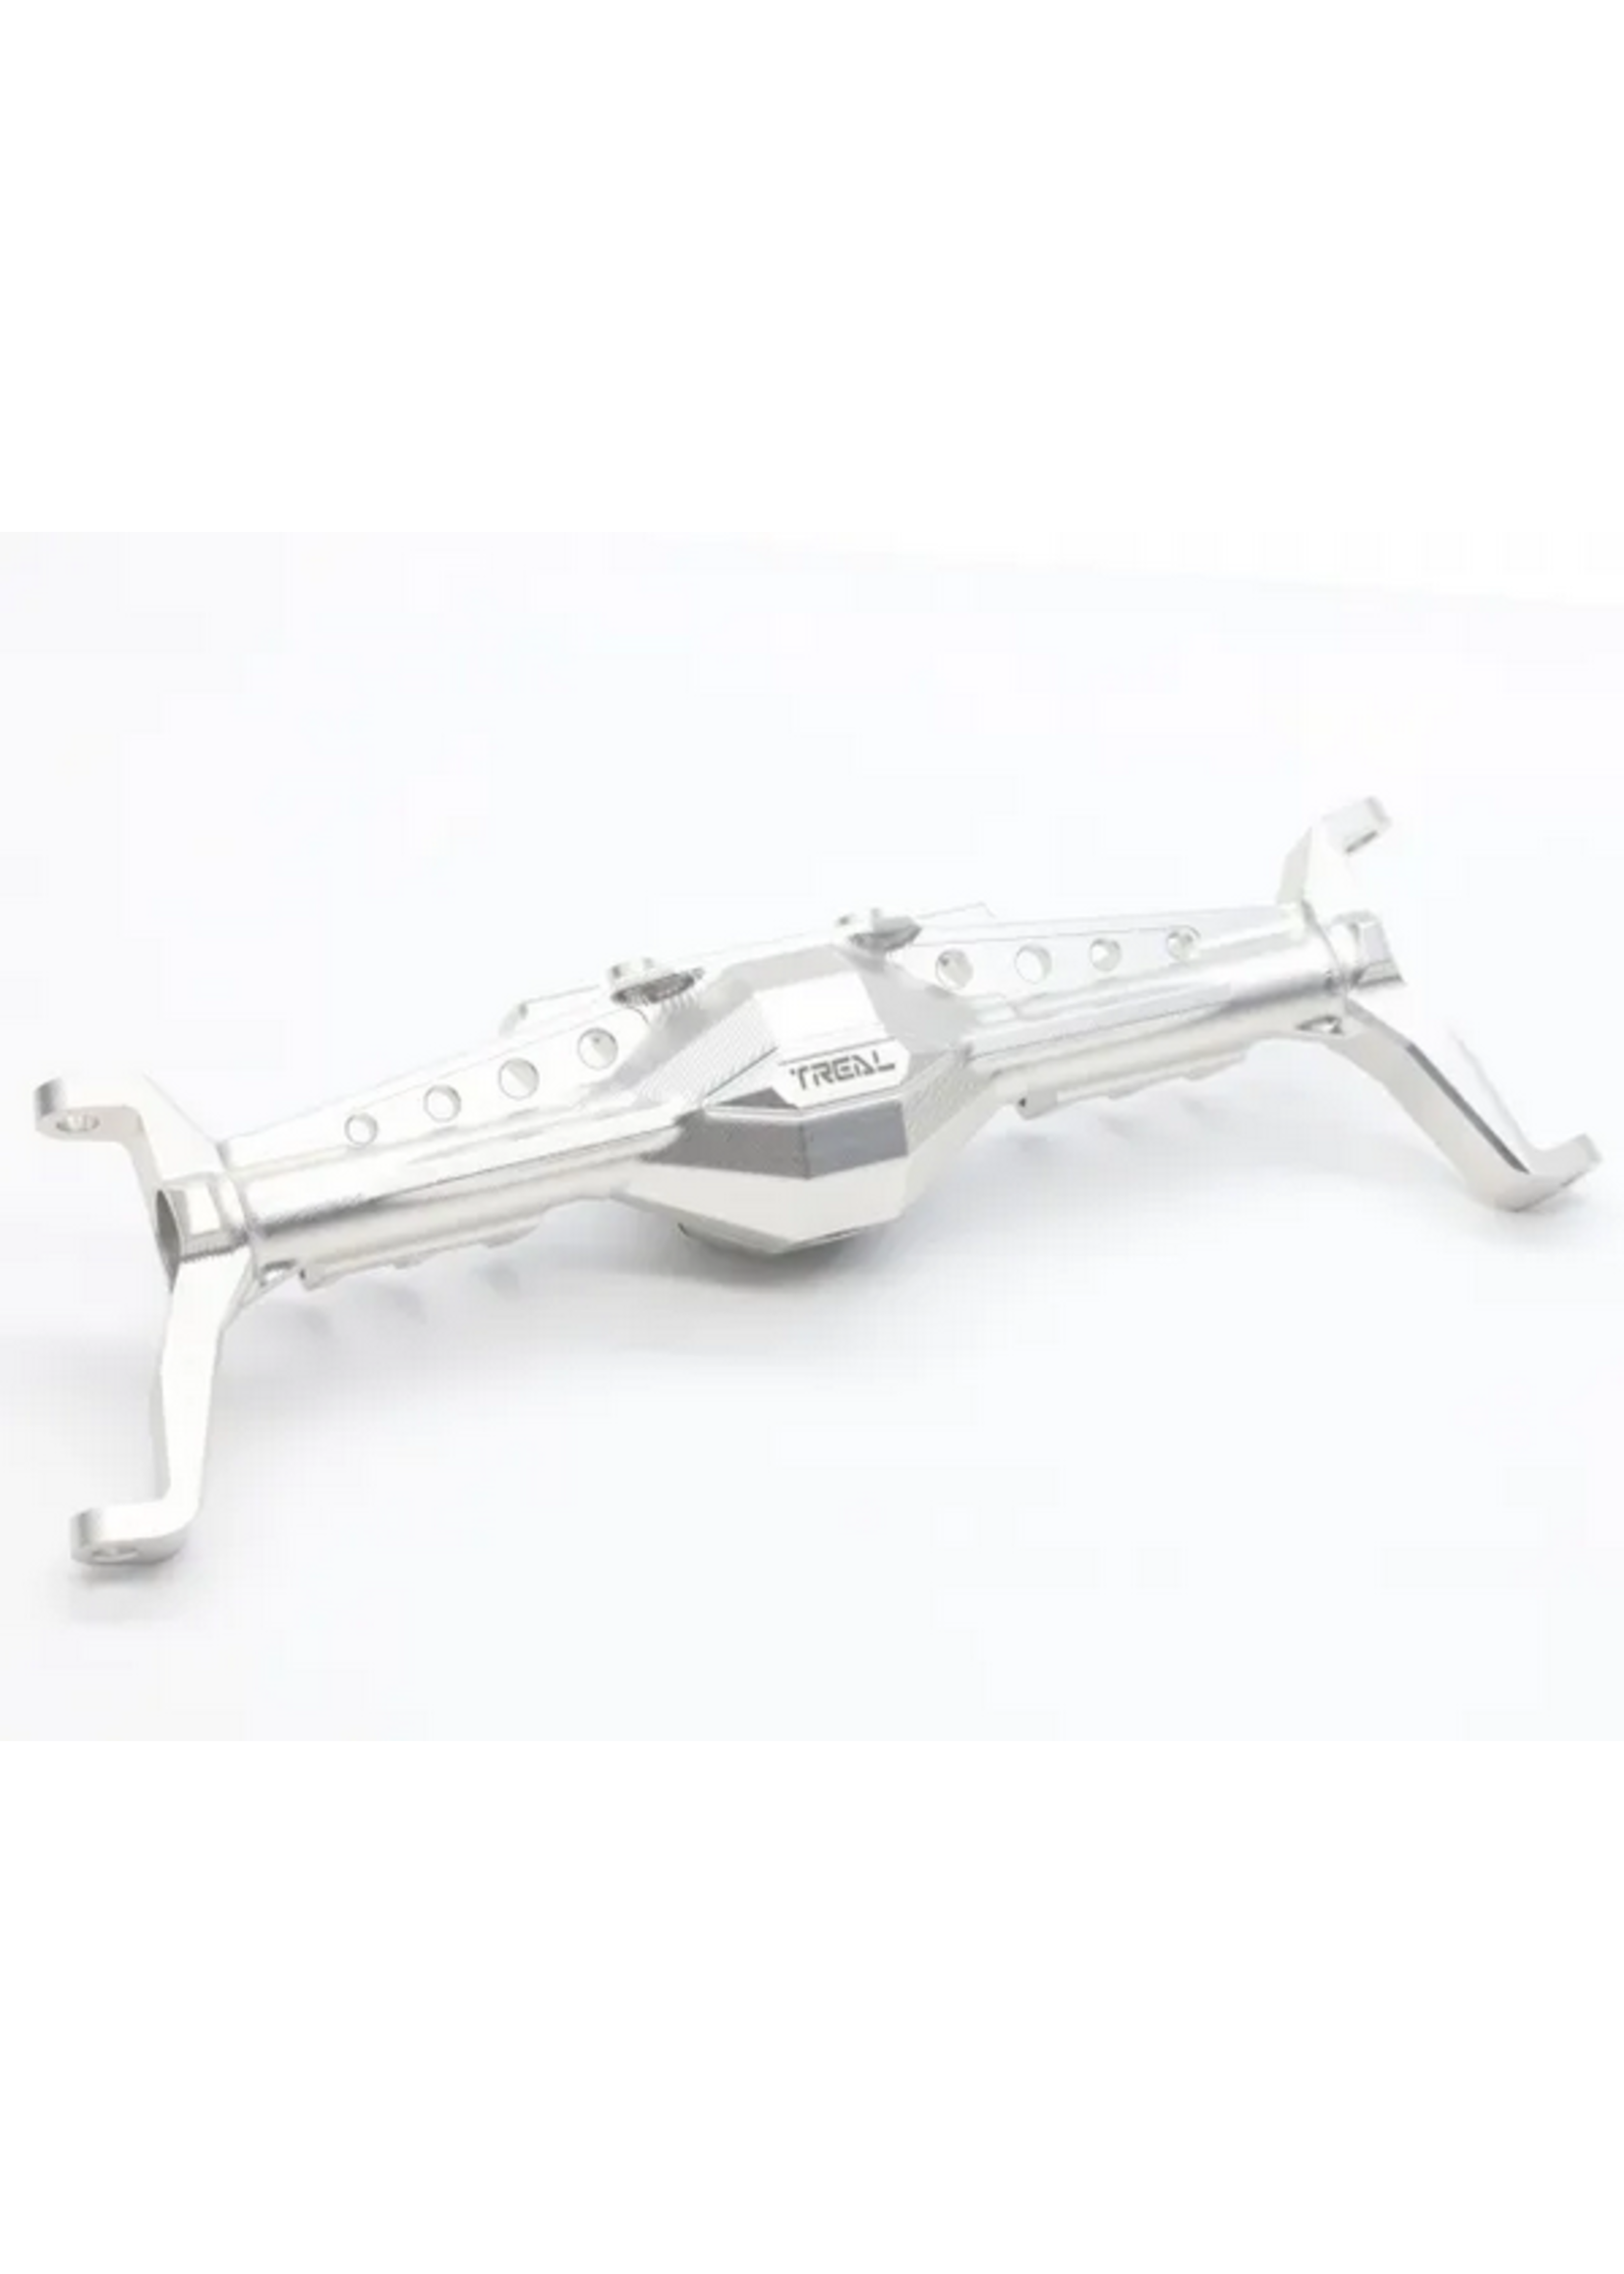 Treal Treal Capra Front Axle Housing CNC Solid Billet Aluminum 7075 One-Piece Design (Clear)